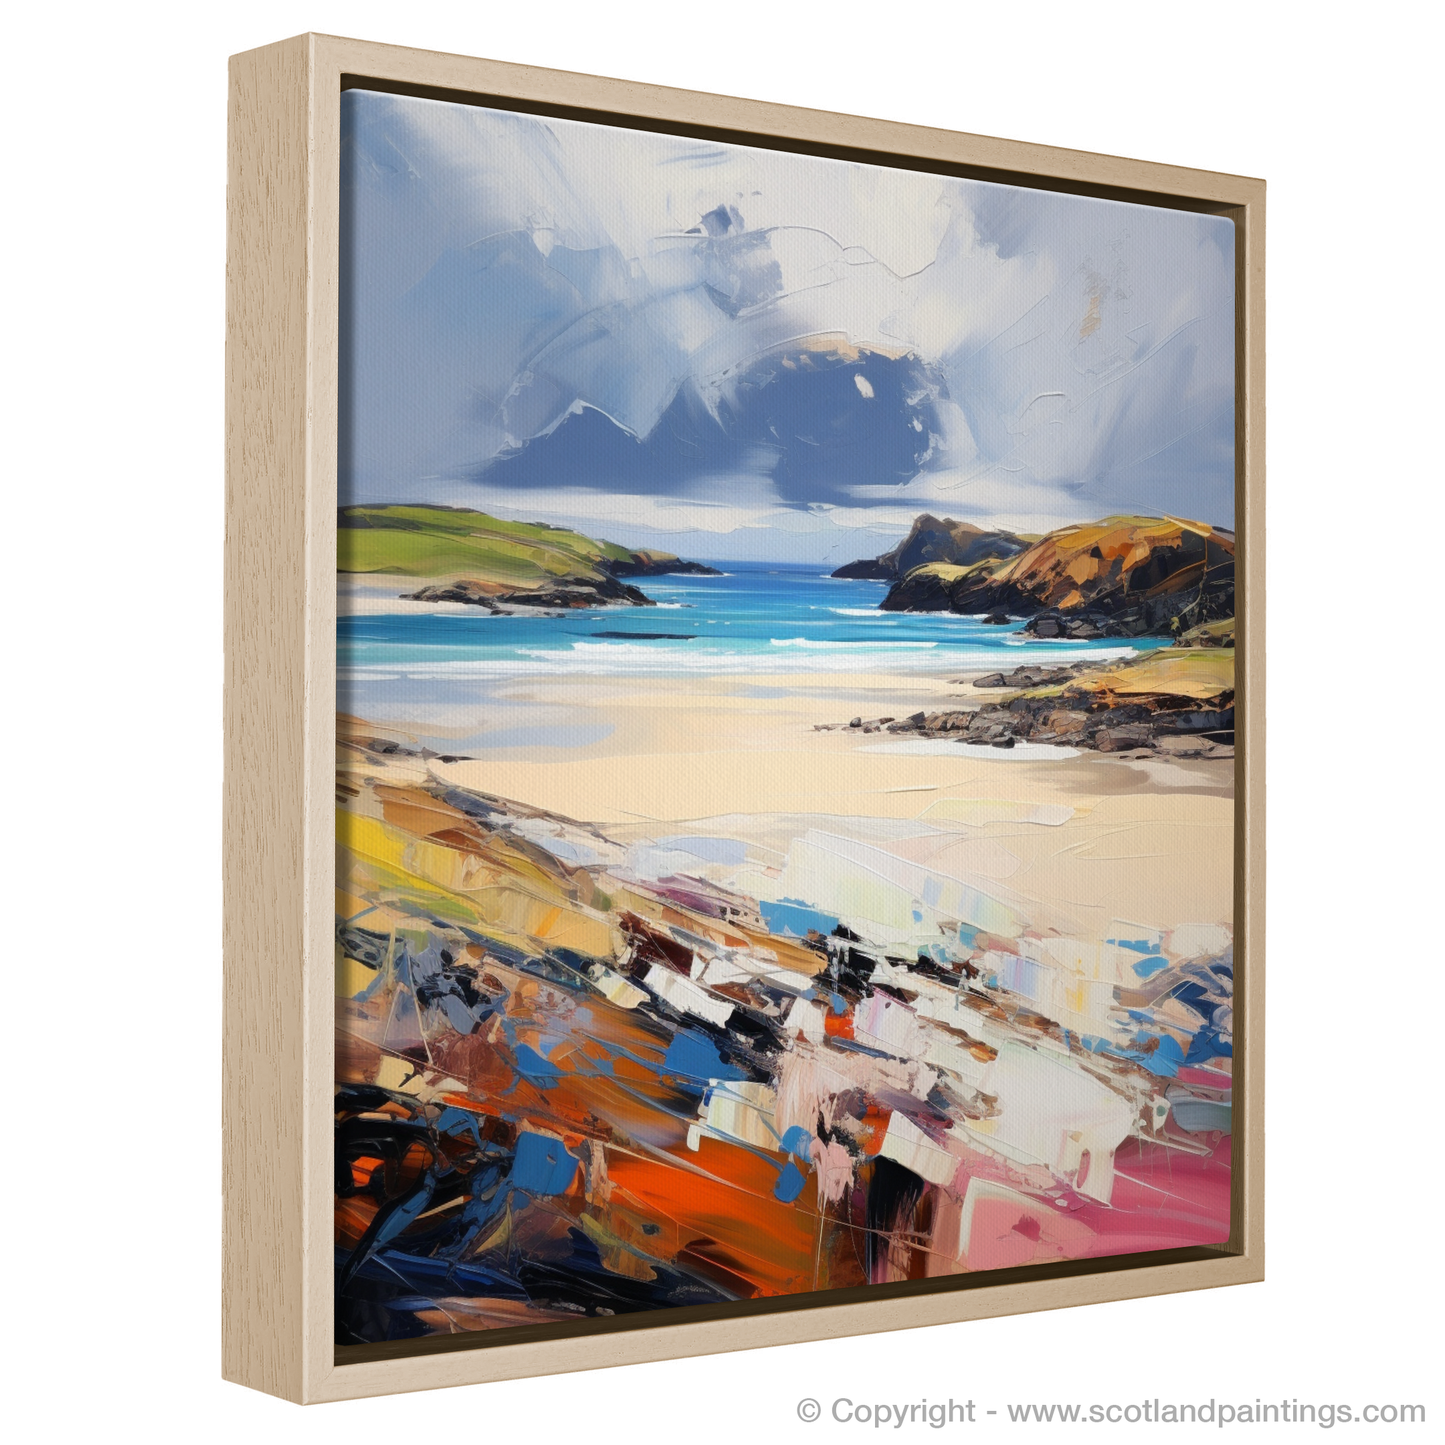 Painting and Art Print of Balnakeil Bay, Durness, Sutherland entitled "Wild Winds and Vivid Skies: An Expressionist Ode to Balnakeil Bay".